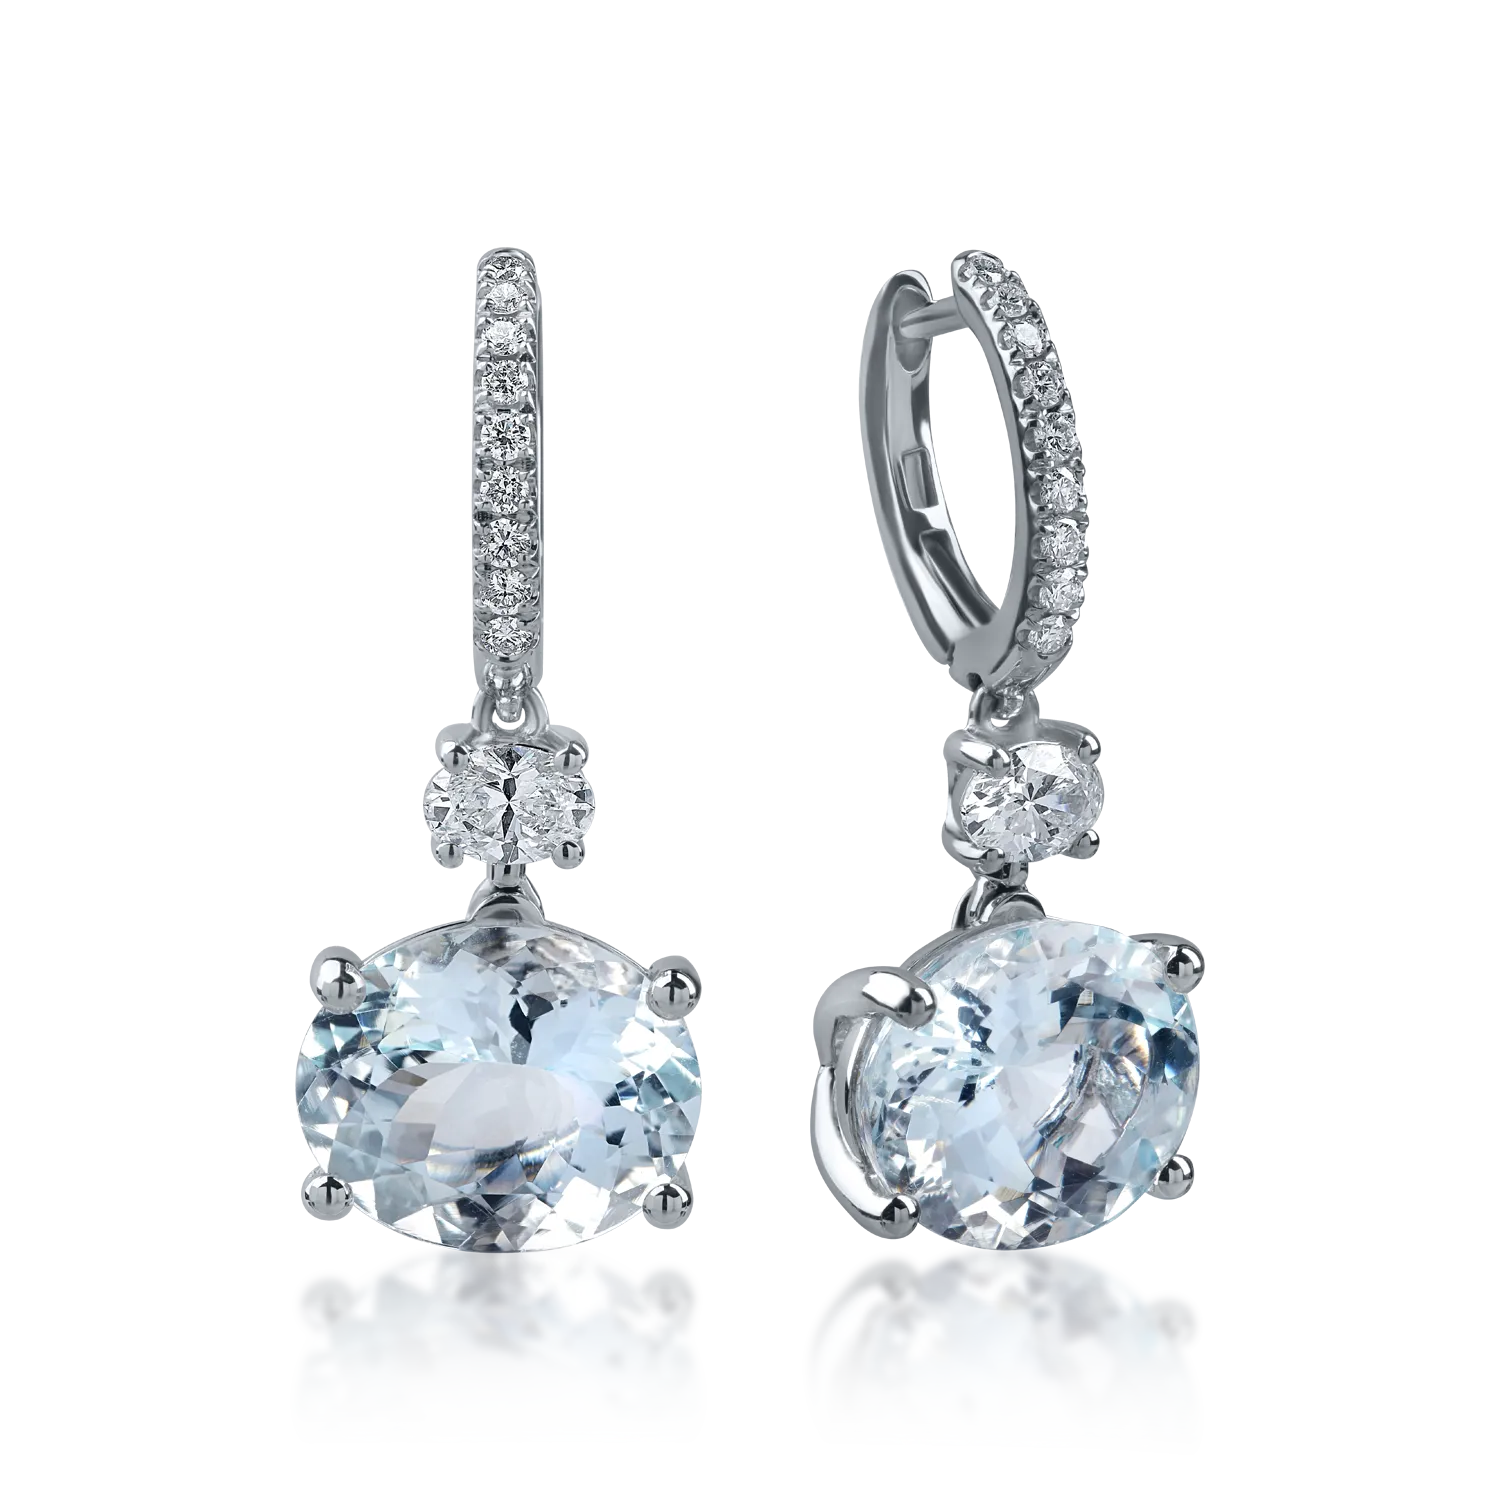 White gold earrings with 6.56ct aquamarines and 0.58ct diamonds